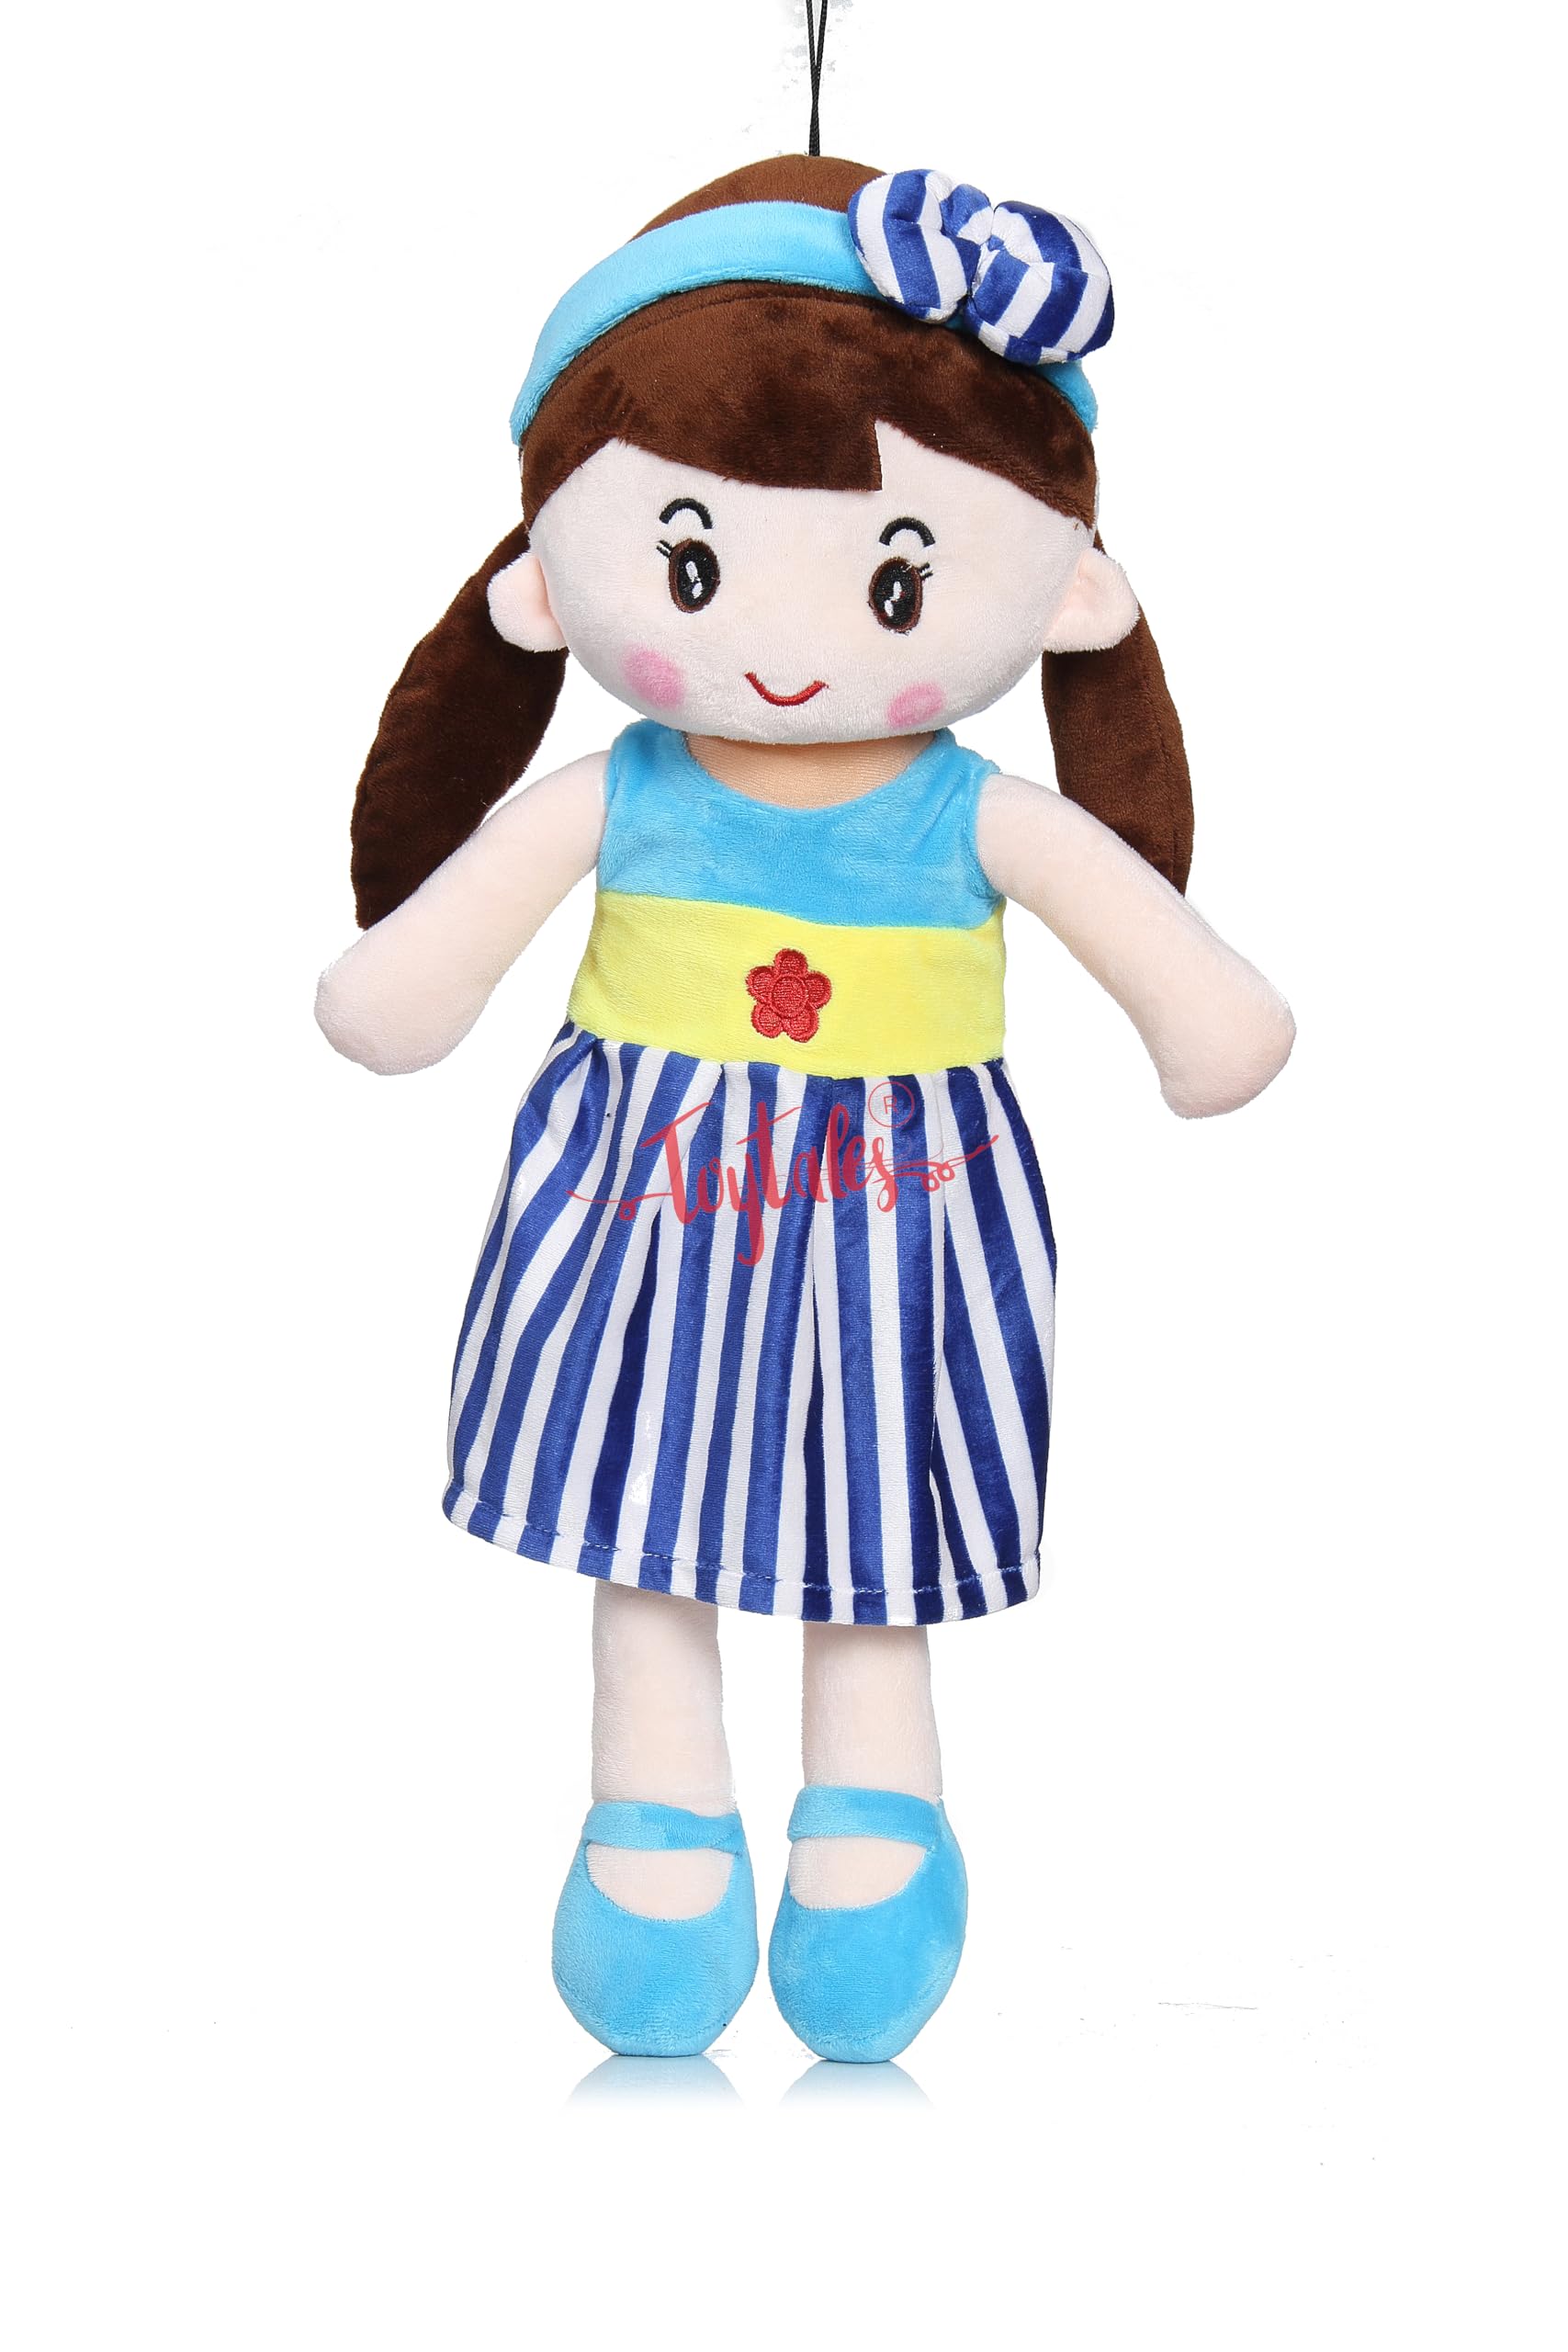 Cute Super Soft Stuffed Doll Small Size 40cm, Cuddly Squishy Dolls, Plush Toy for Baby Girls, Spark Imaginative Play, Safe & Fun Gift for Kids, Perfect for Playtime & Cuddling (Blue)